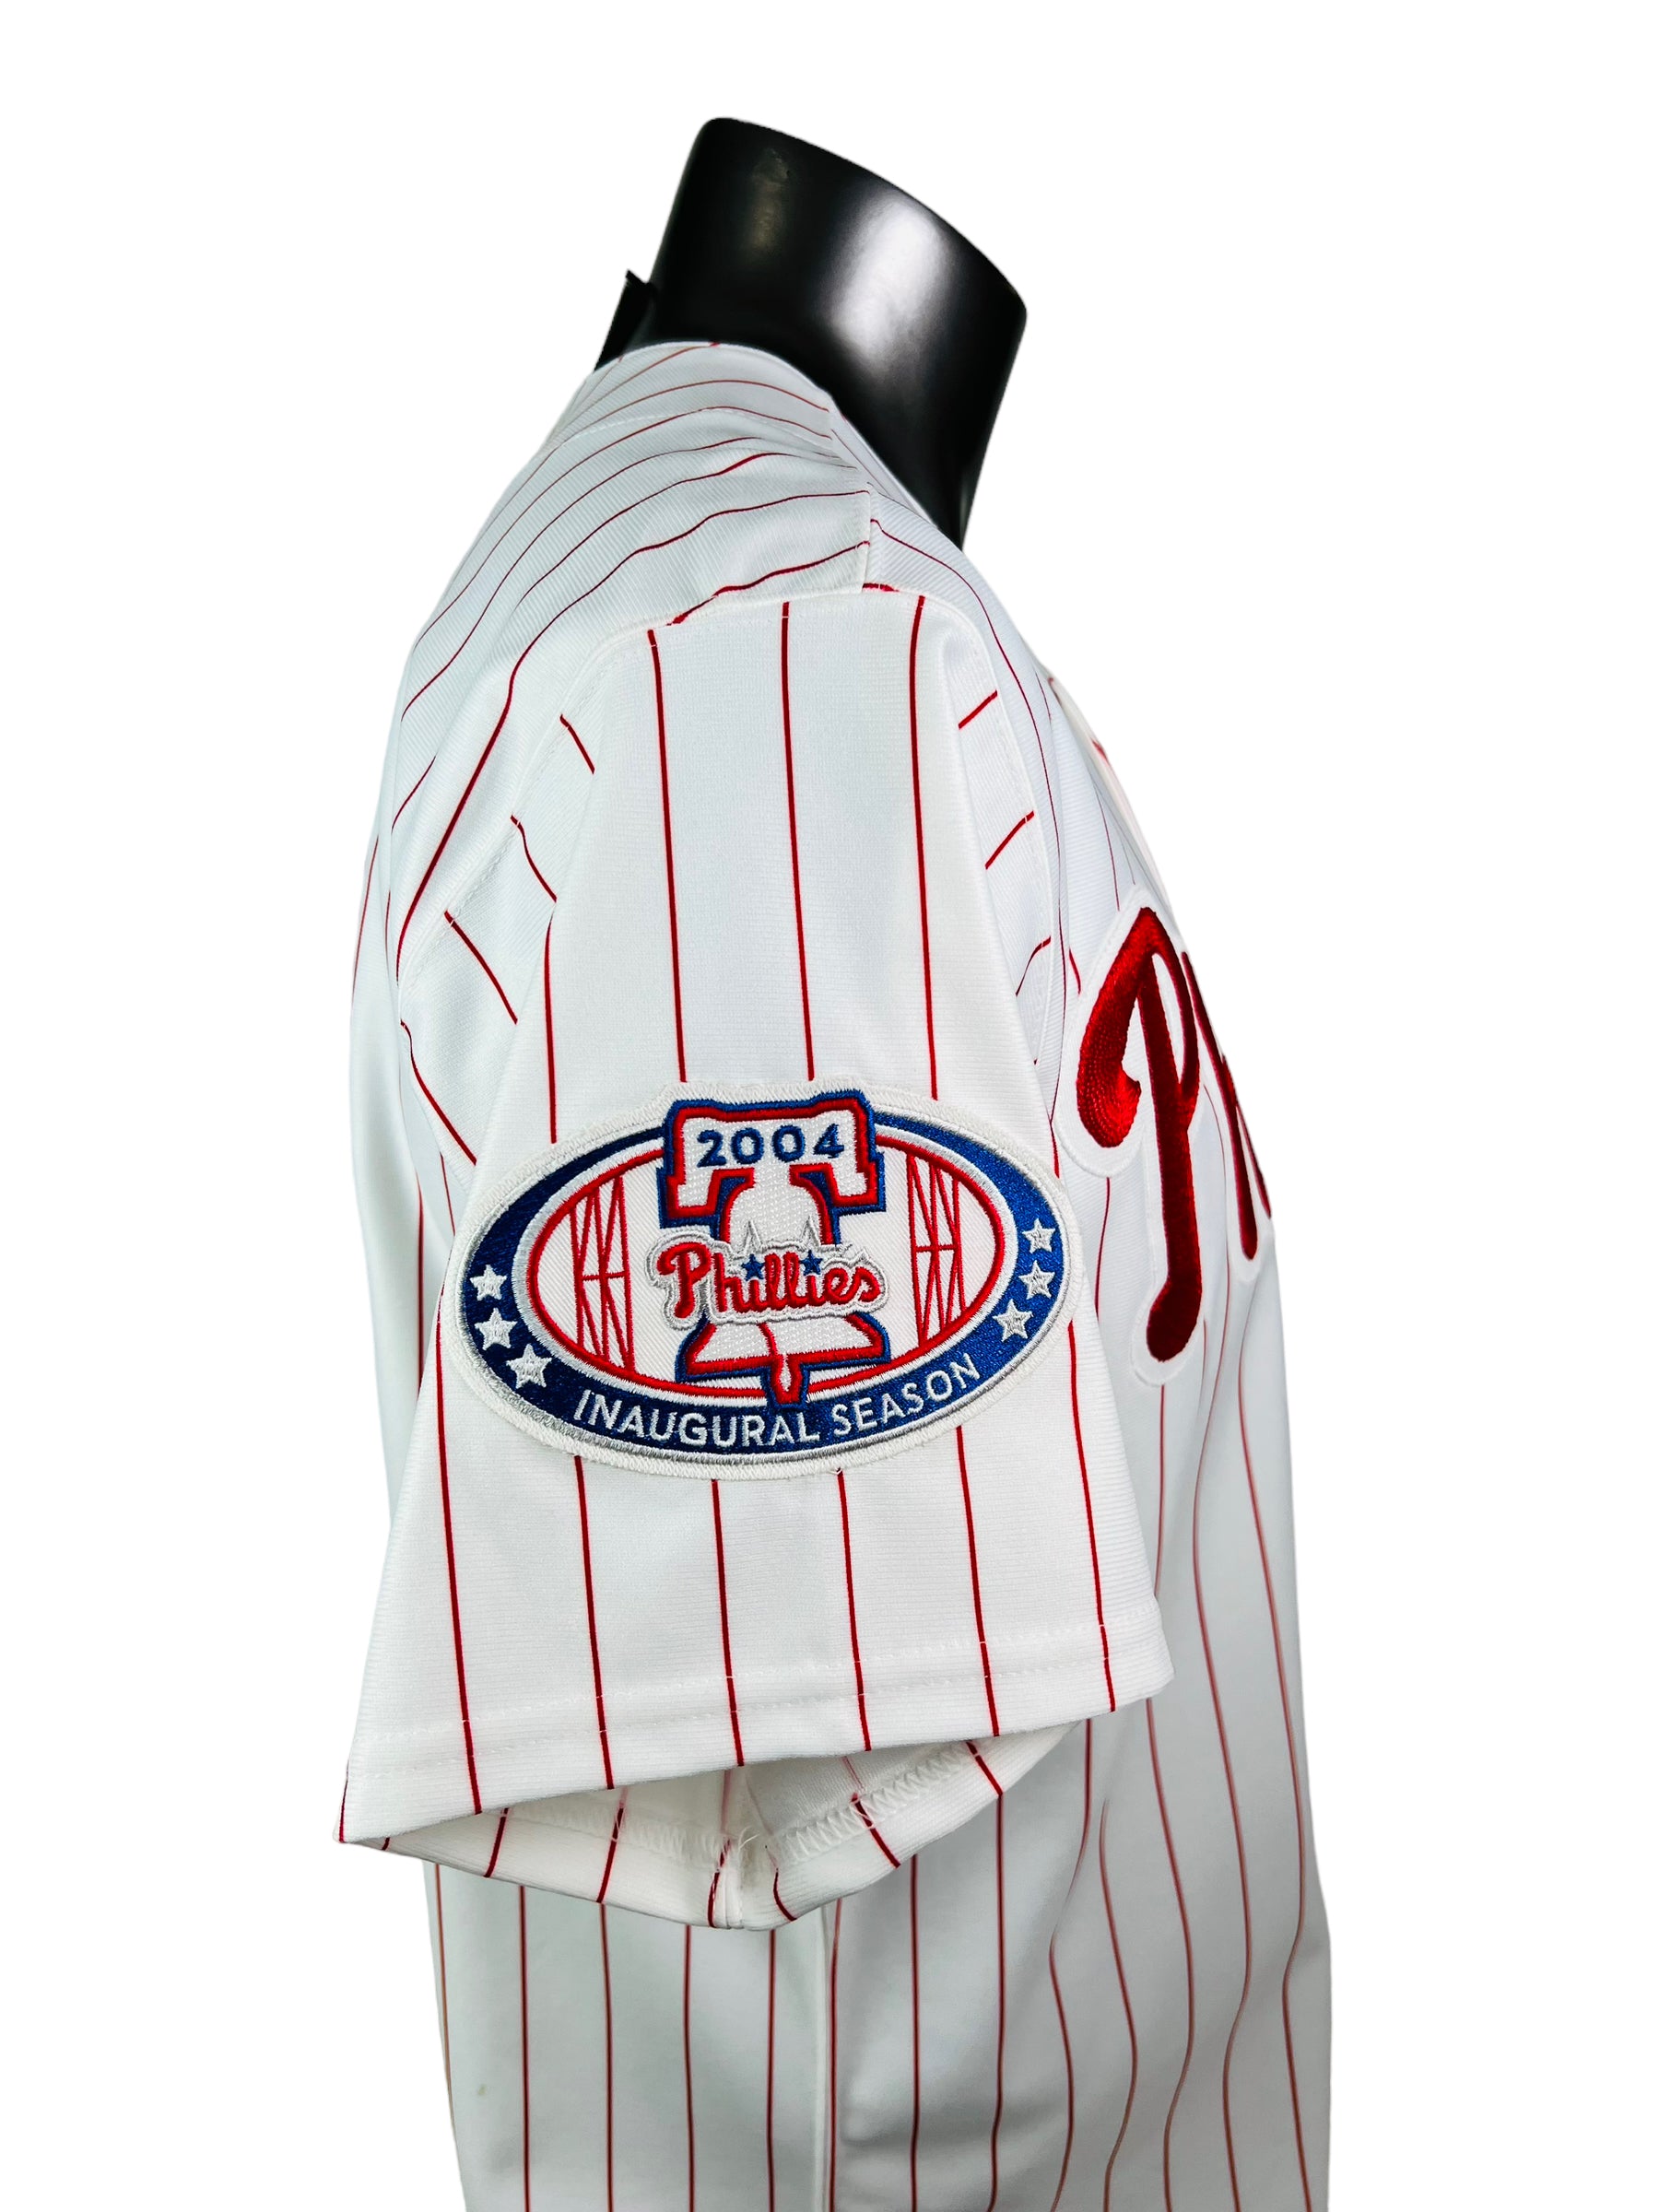 Jim Thome Autographed Jersey - Size 52